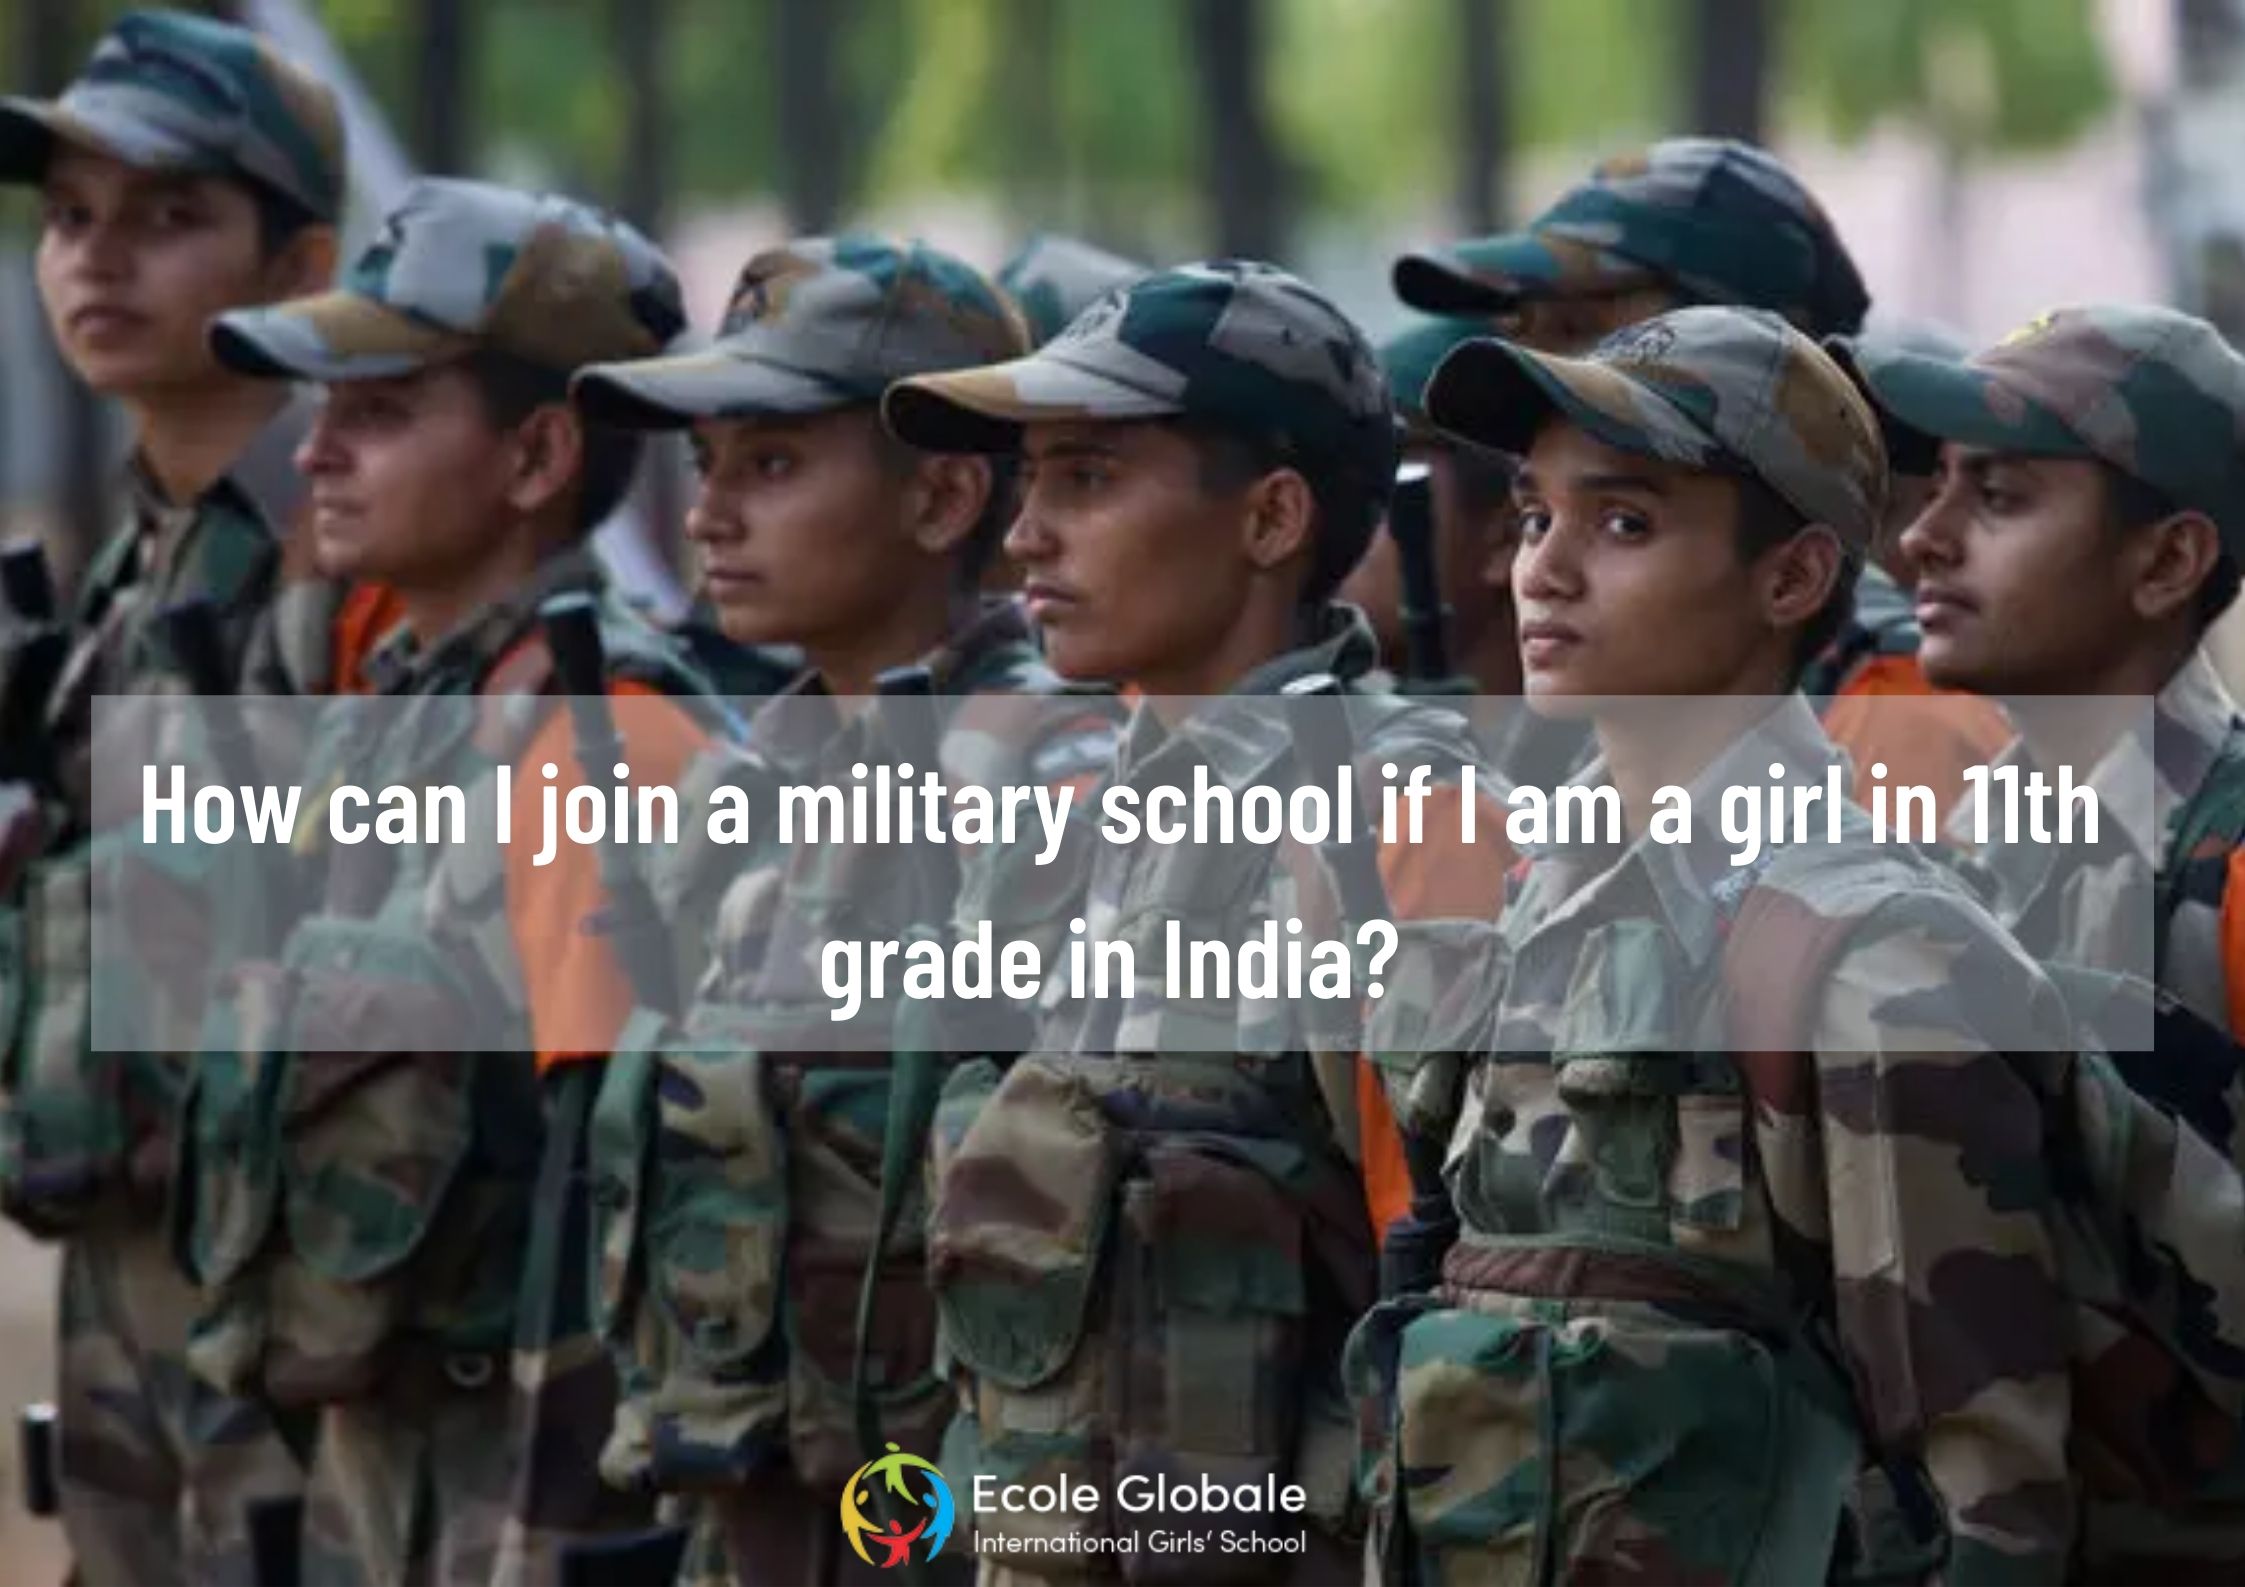 How can I join a military school if I am a girl in 11th grade in India?